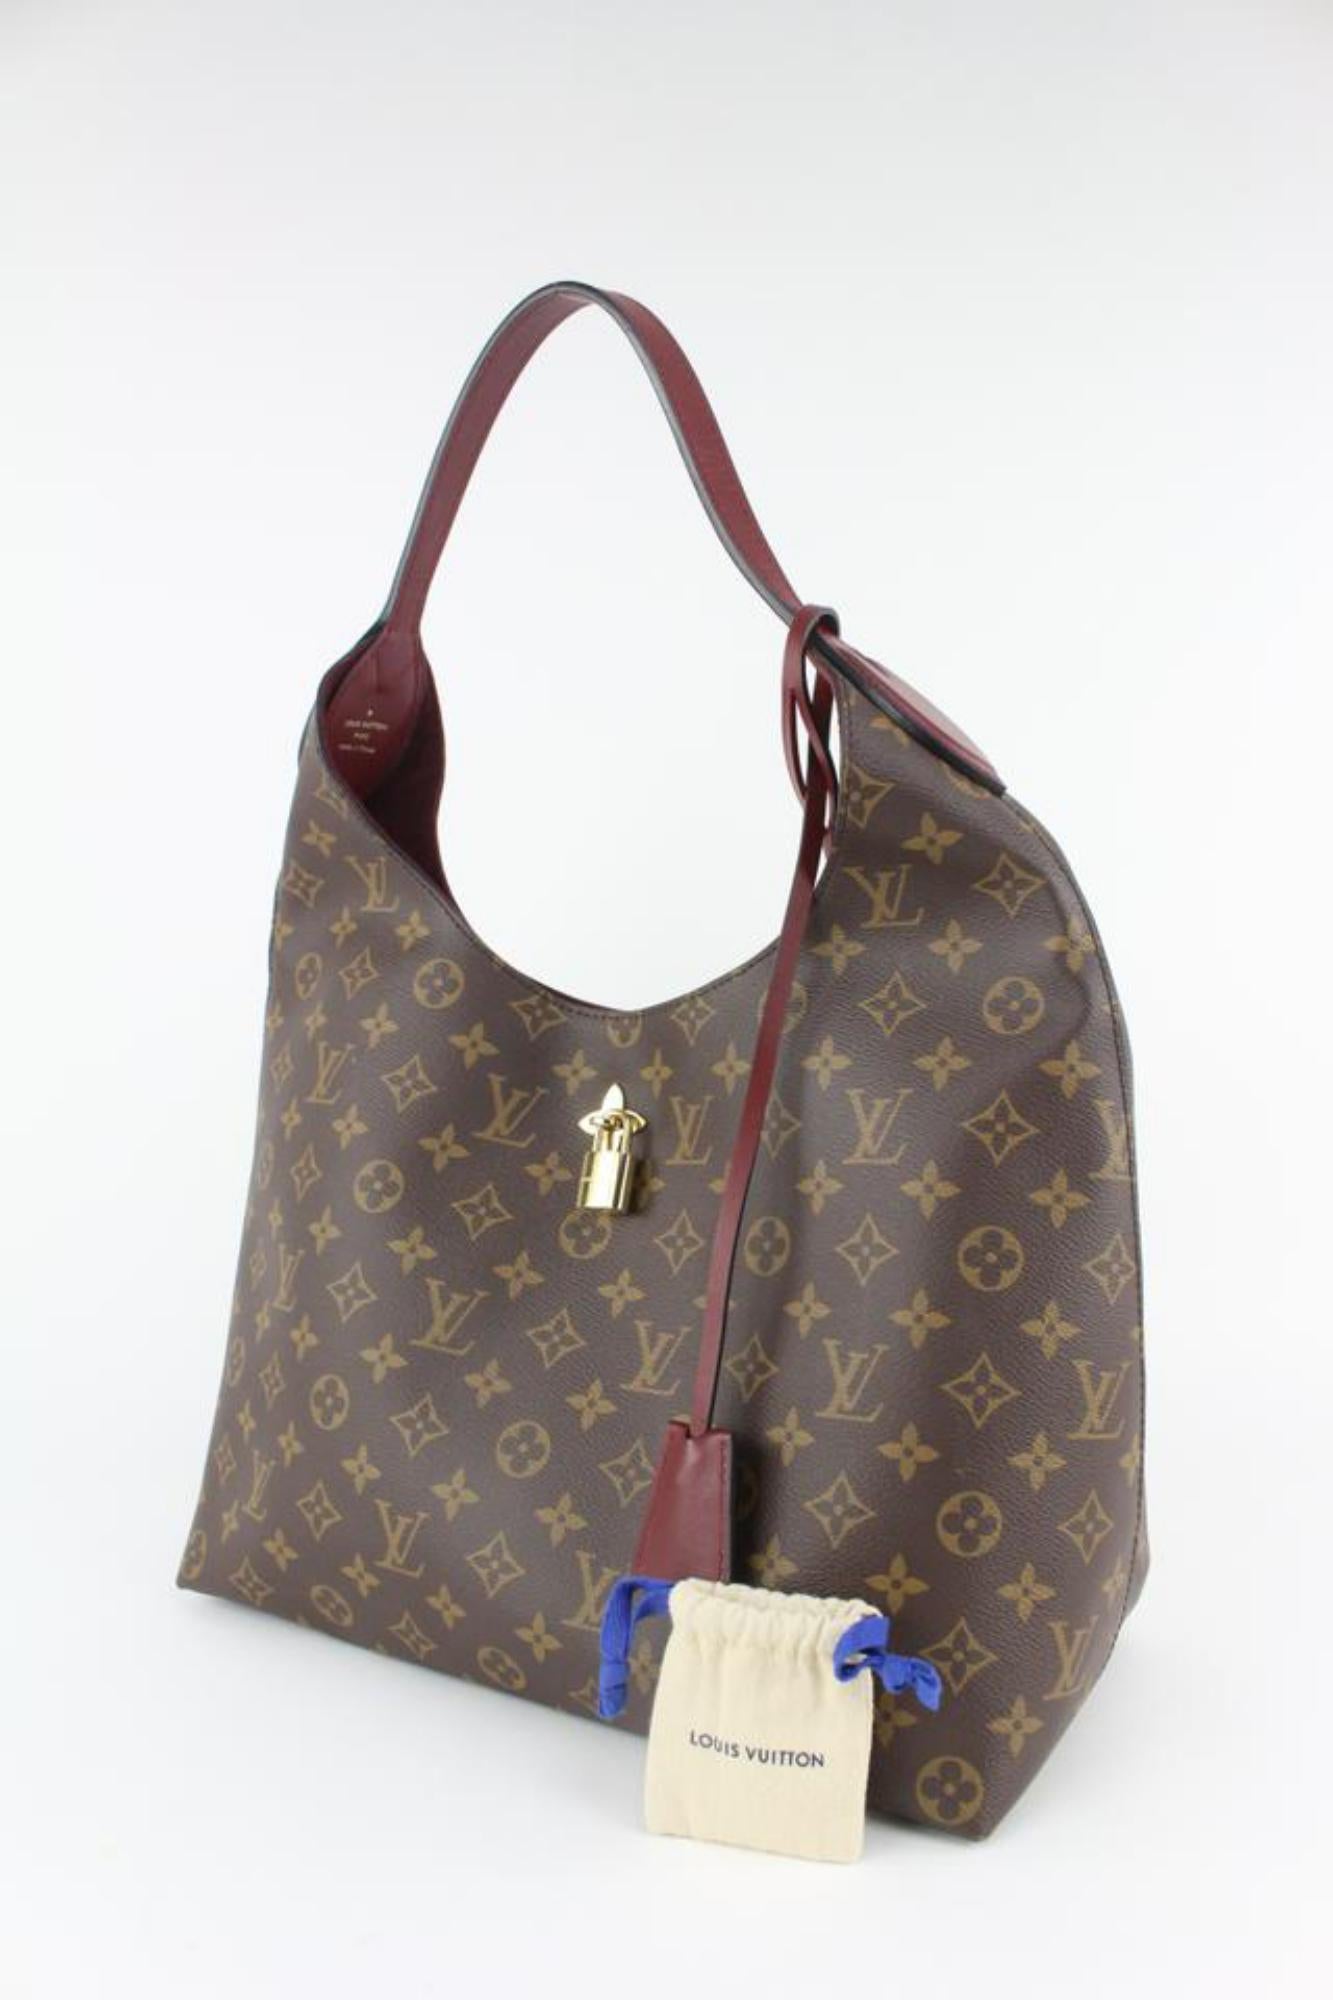 Louis Vuitton Discontinued Monogram Flower Hobo Artsy 121lv34 For Sale 4